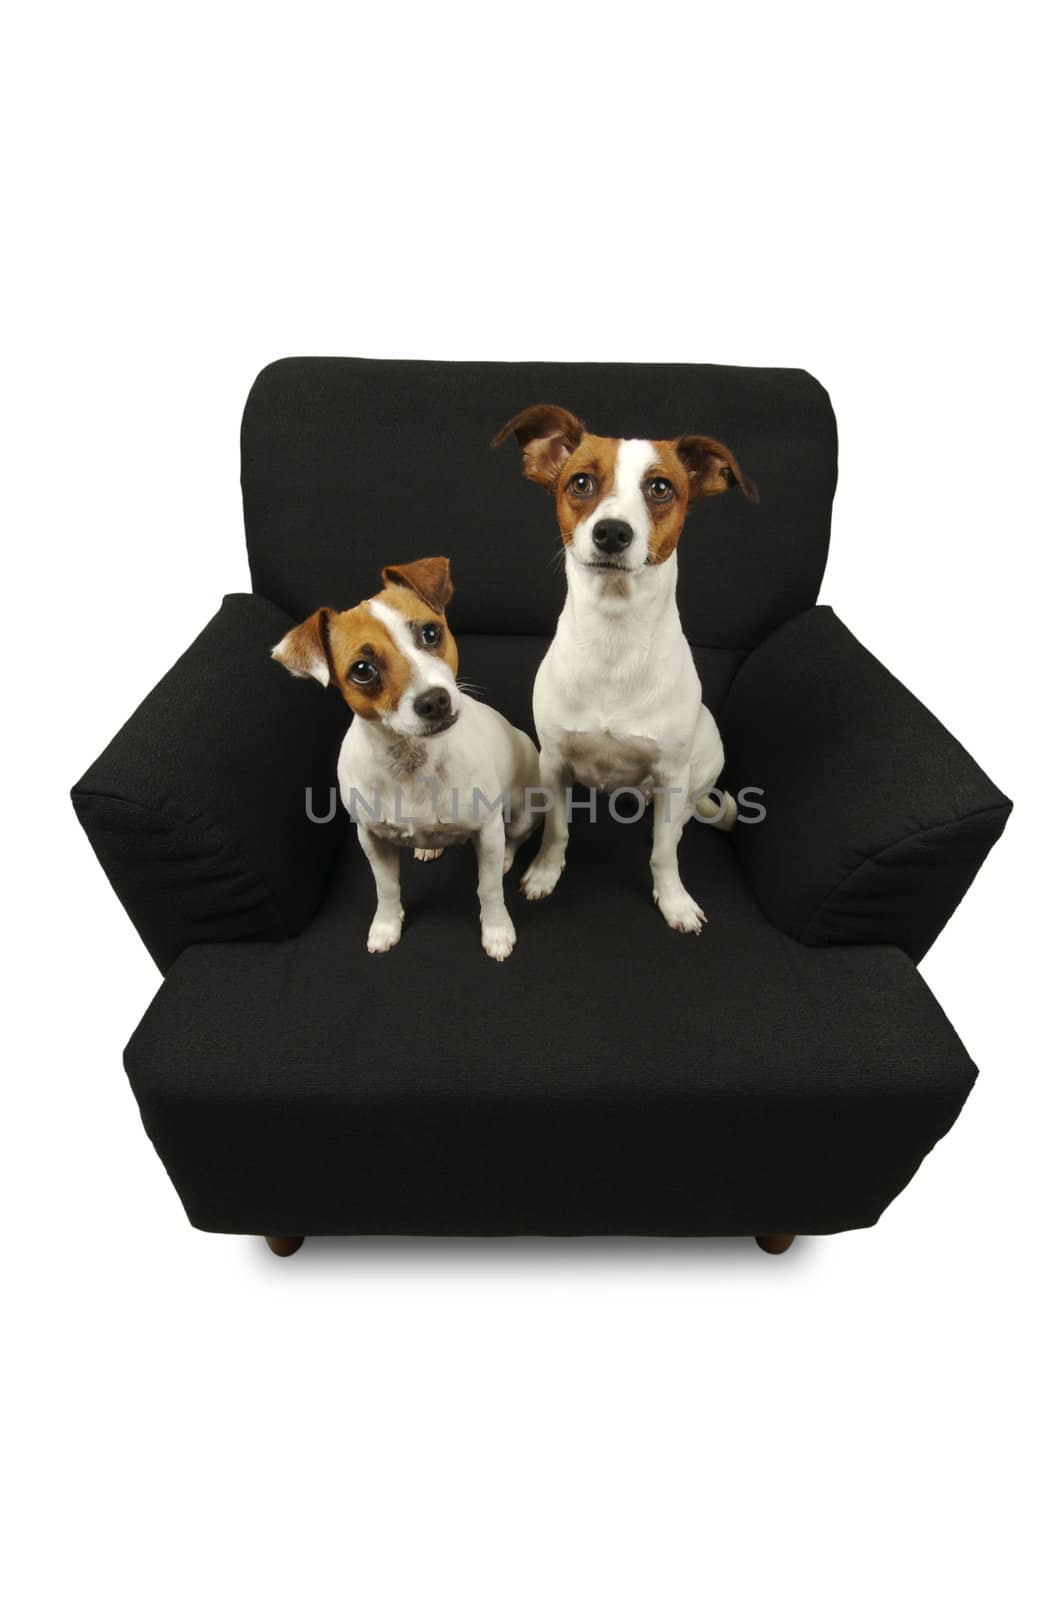 Two Jack Russell Terriers sitting on a black chair isolated on a white background.